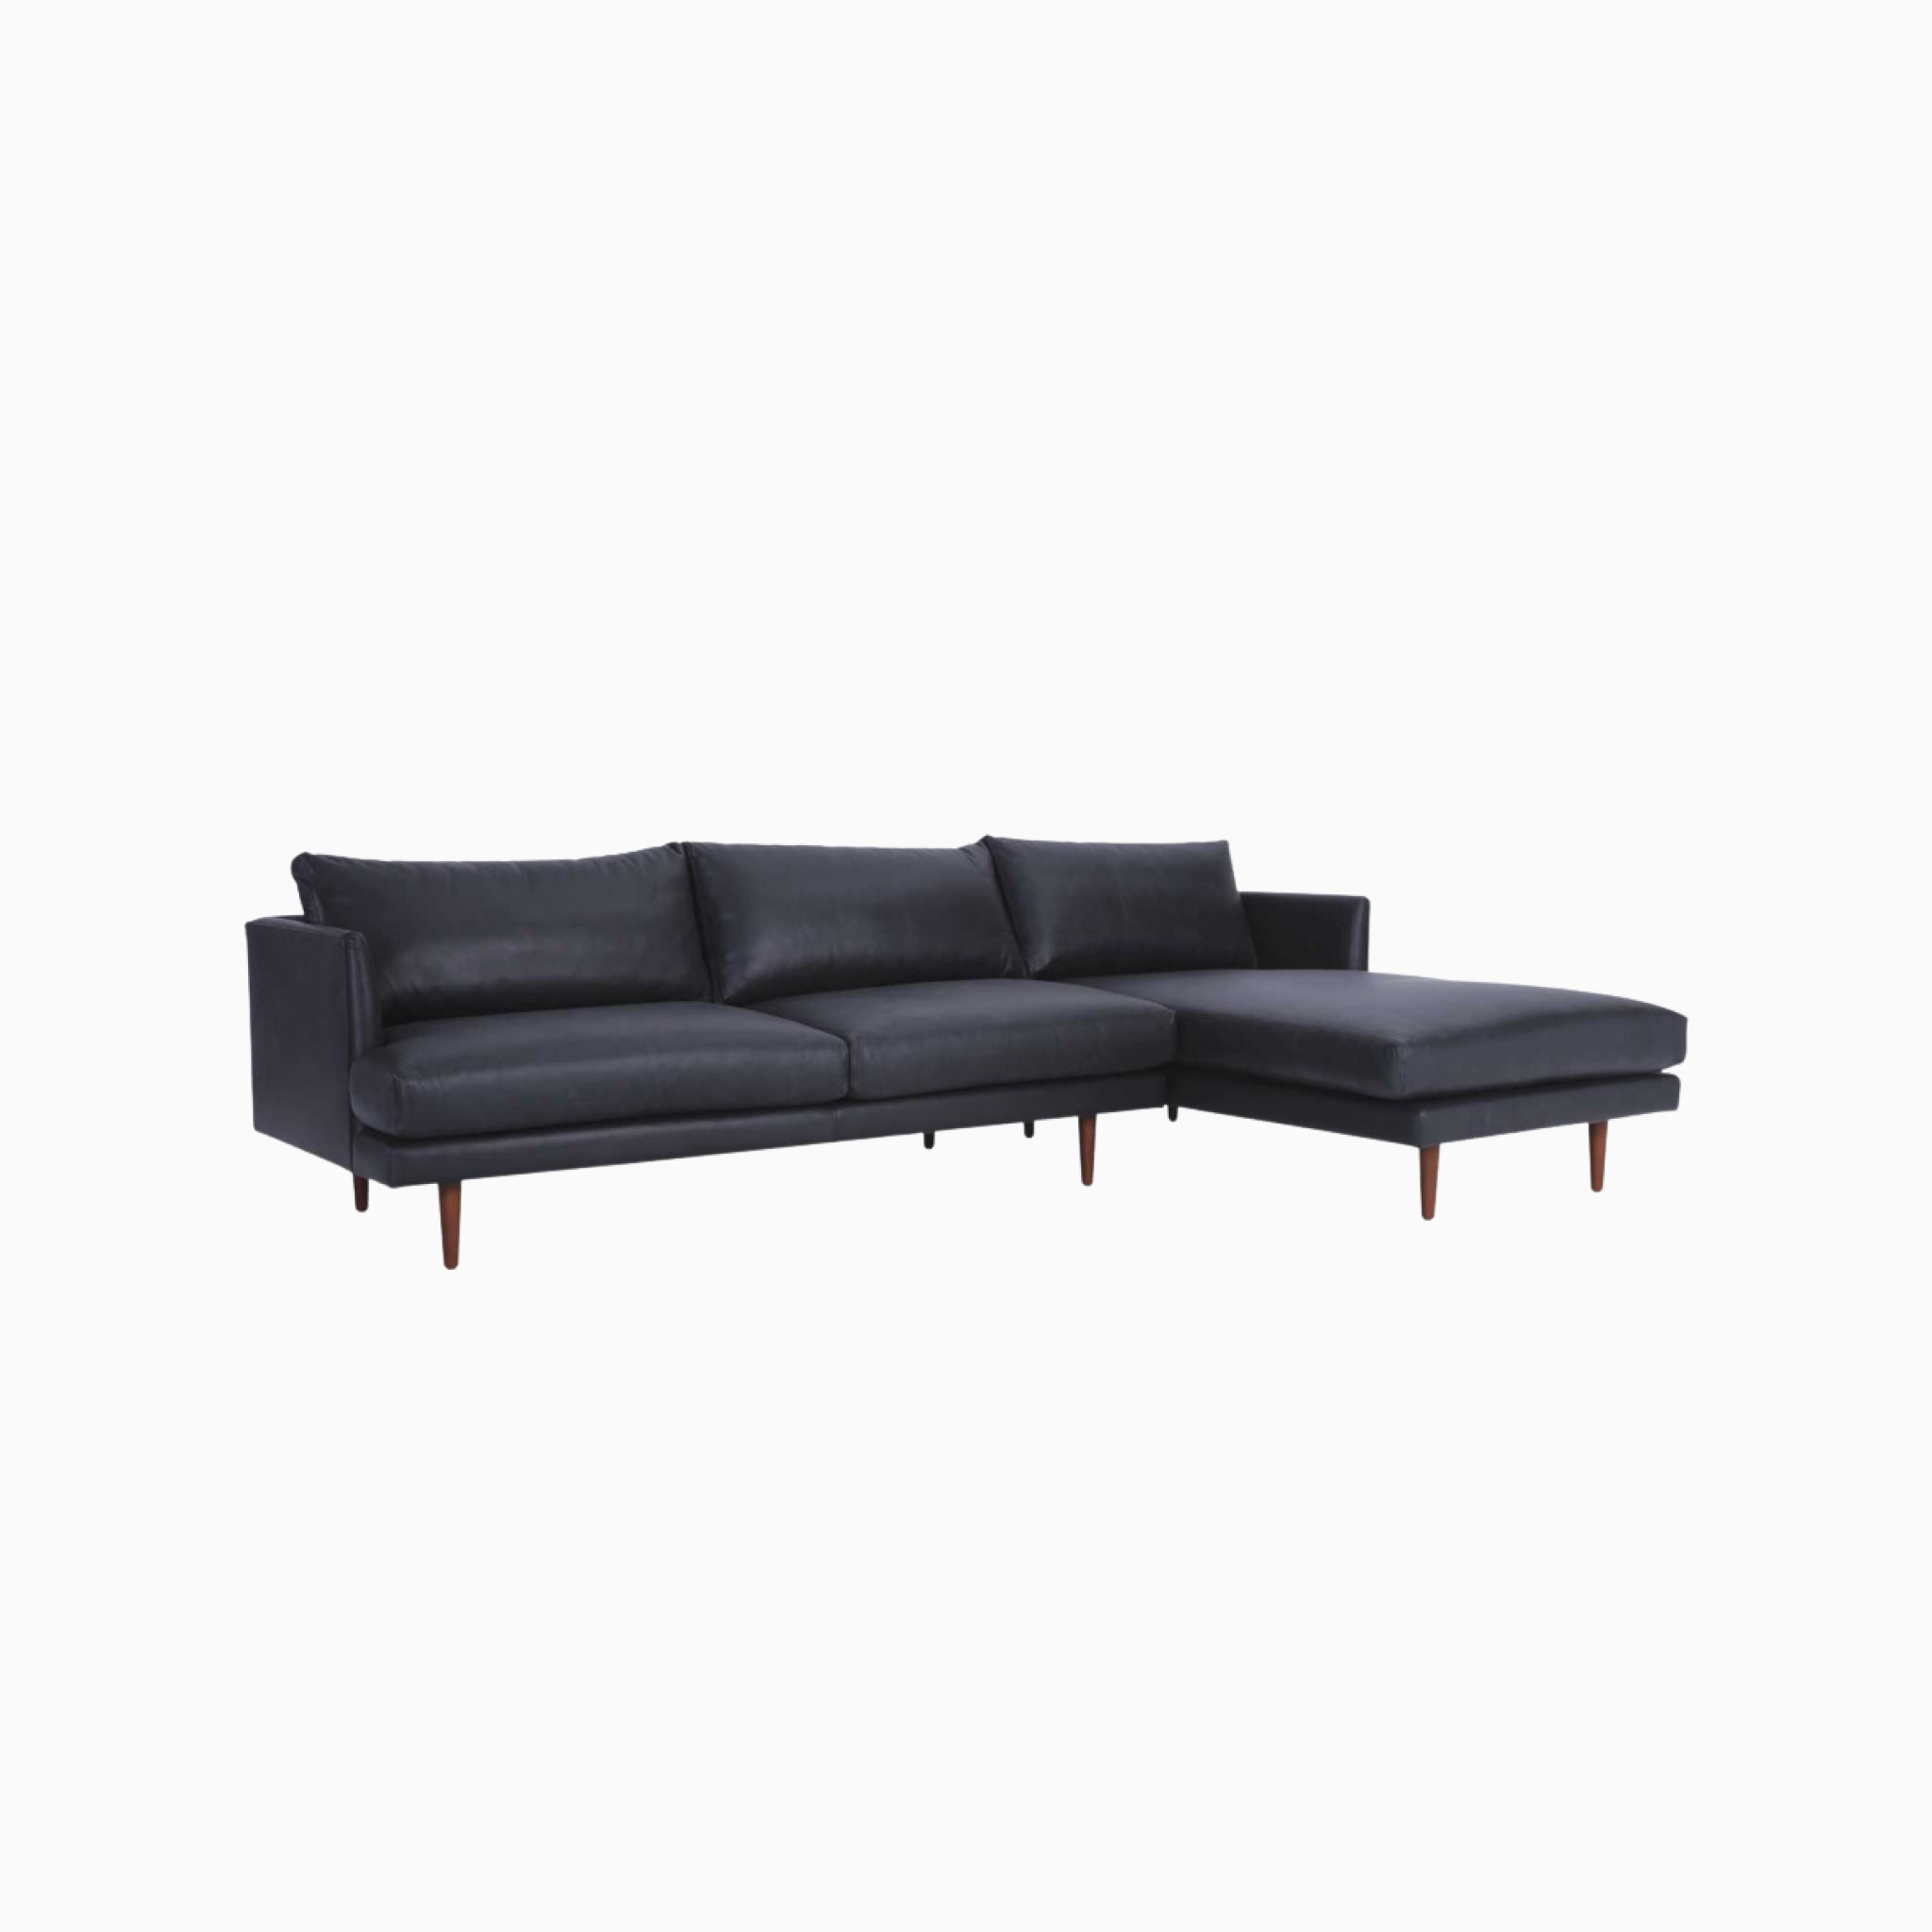 Nord 3 Seater Left Chaise Sofa with Aniline Leather